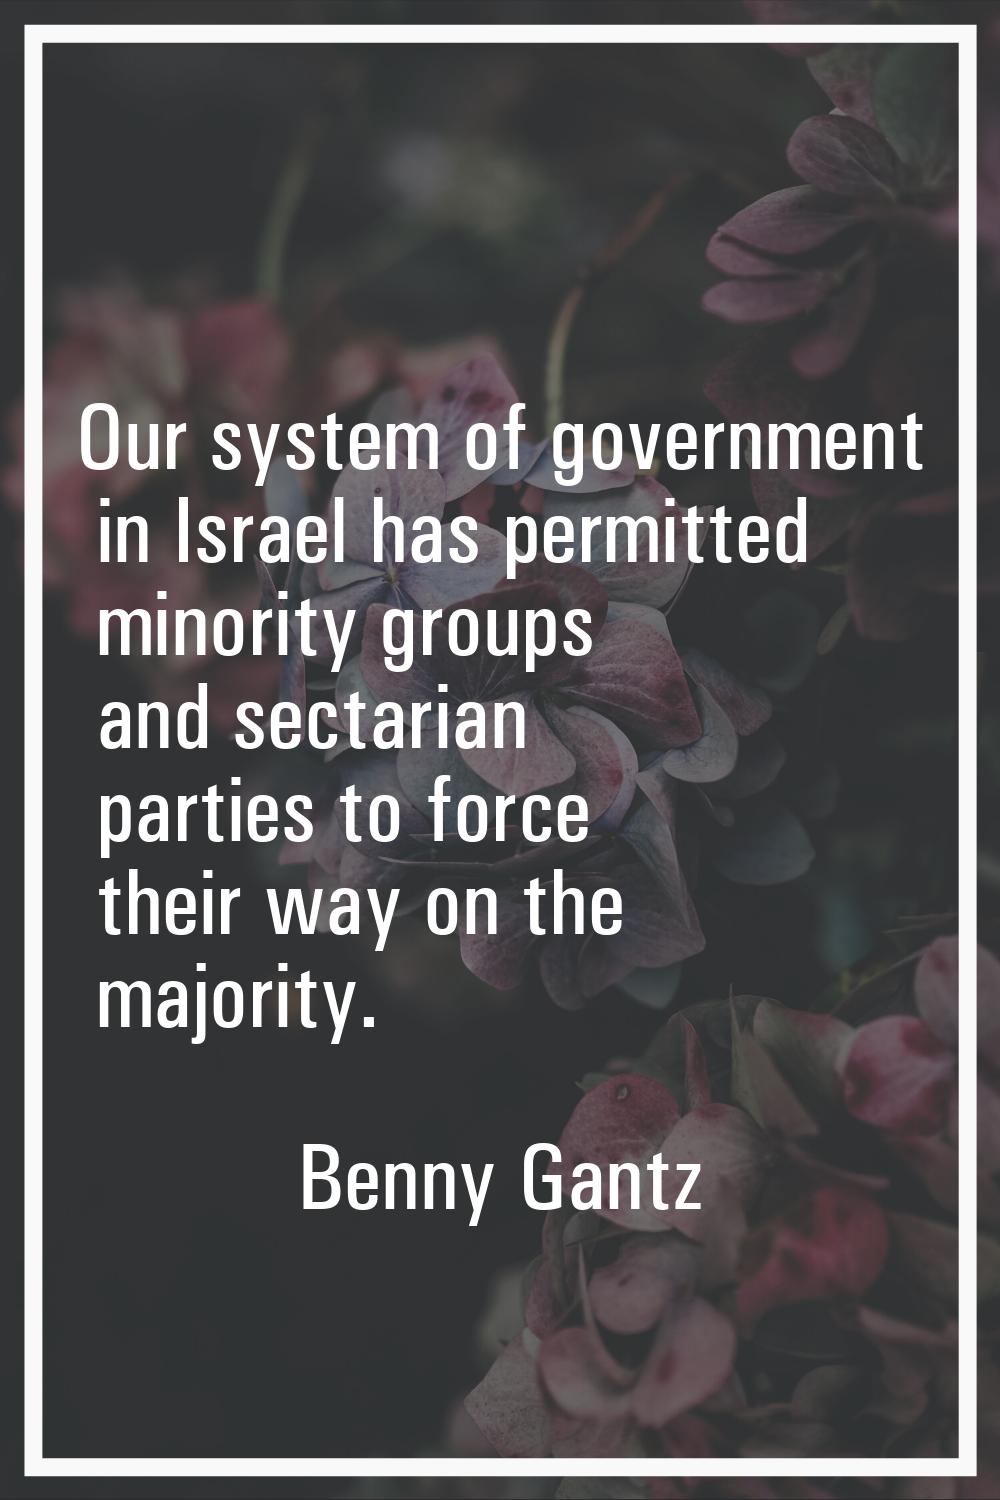 Our system of government in Israel has permitted minority groups and sectarian parties to force the